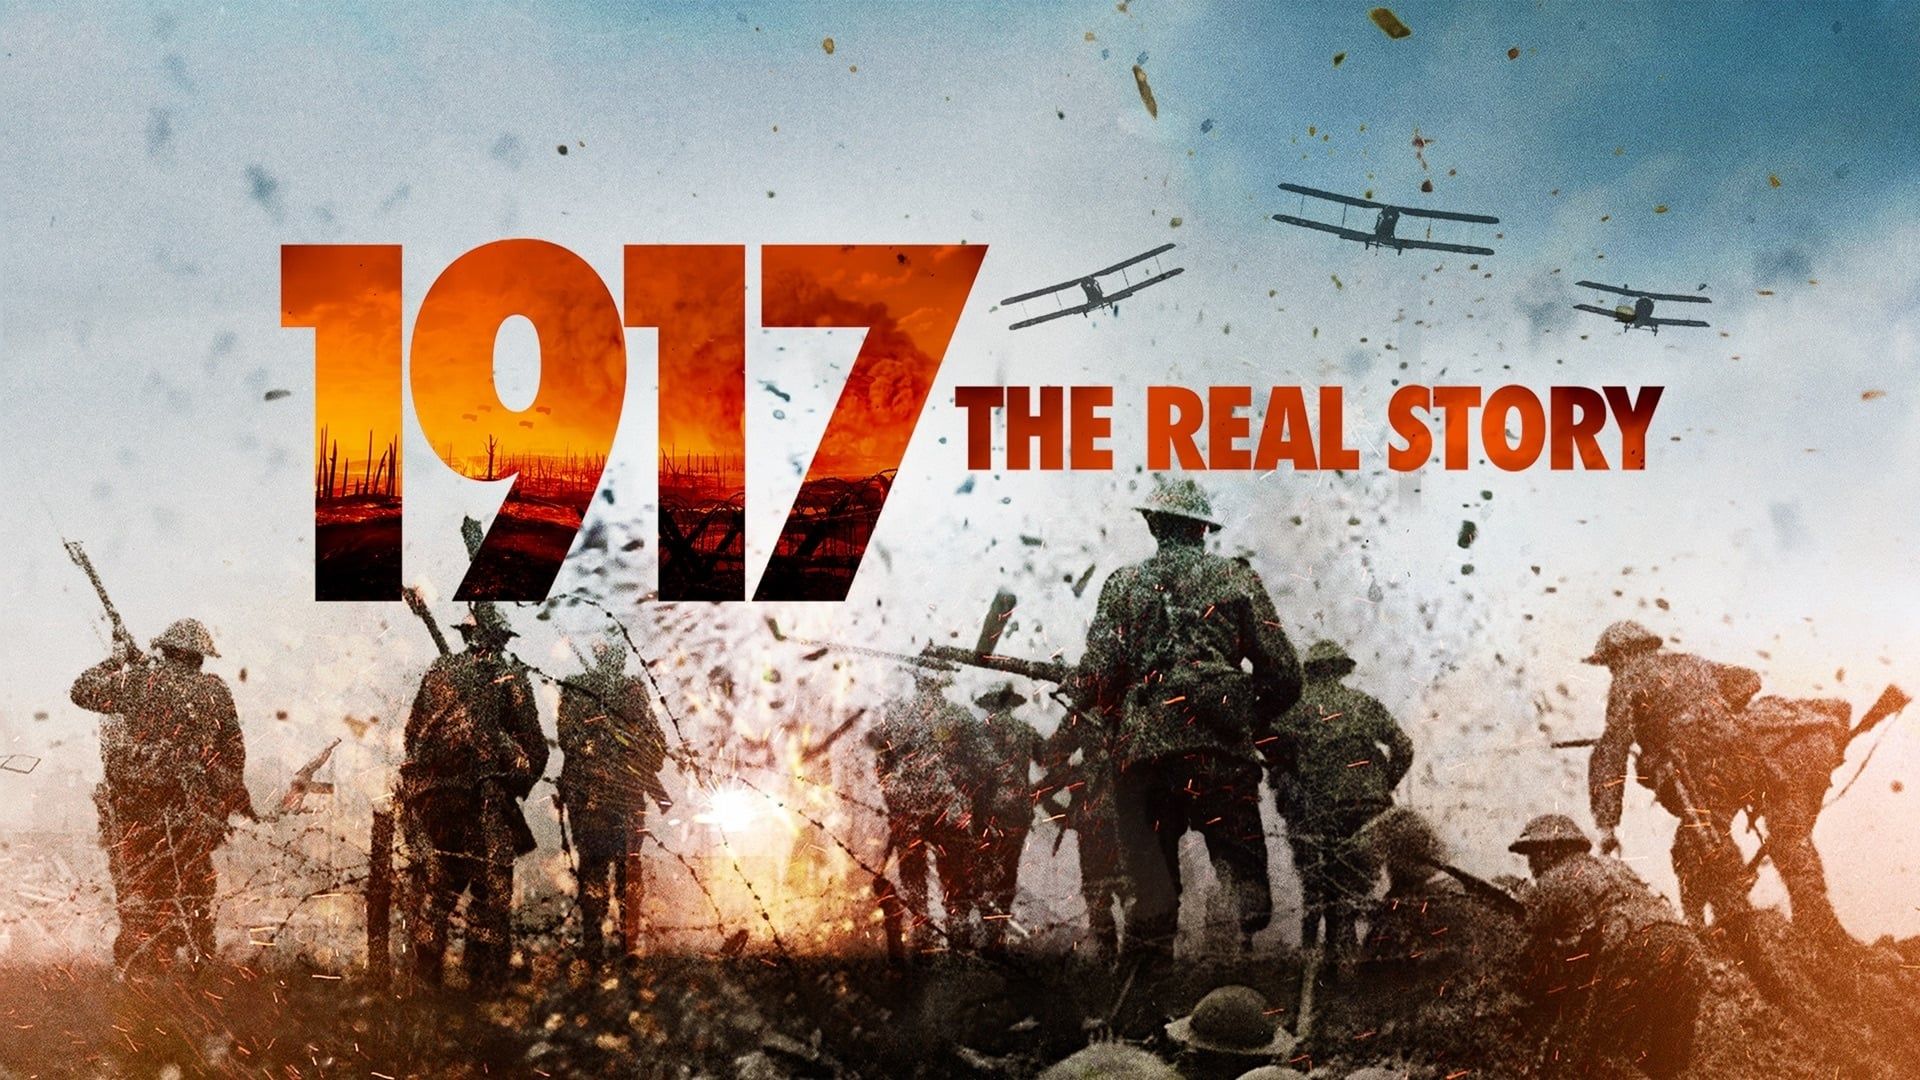 1917: The Real Story background